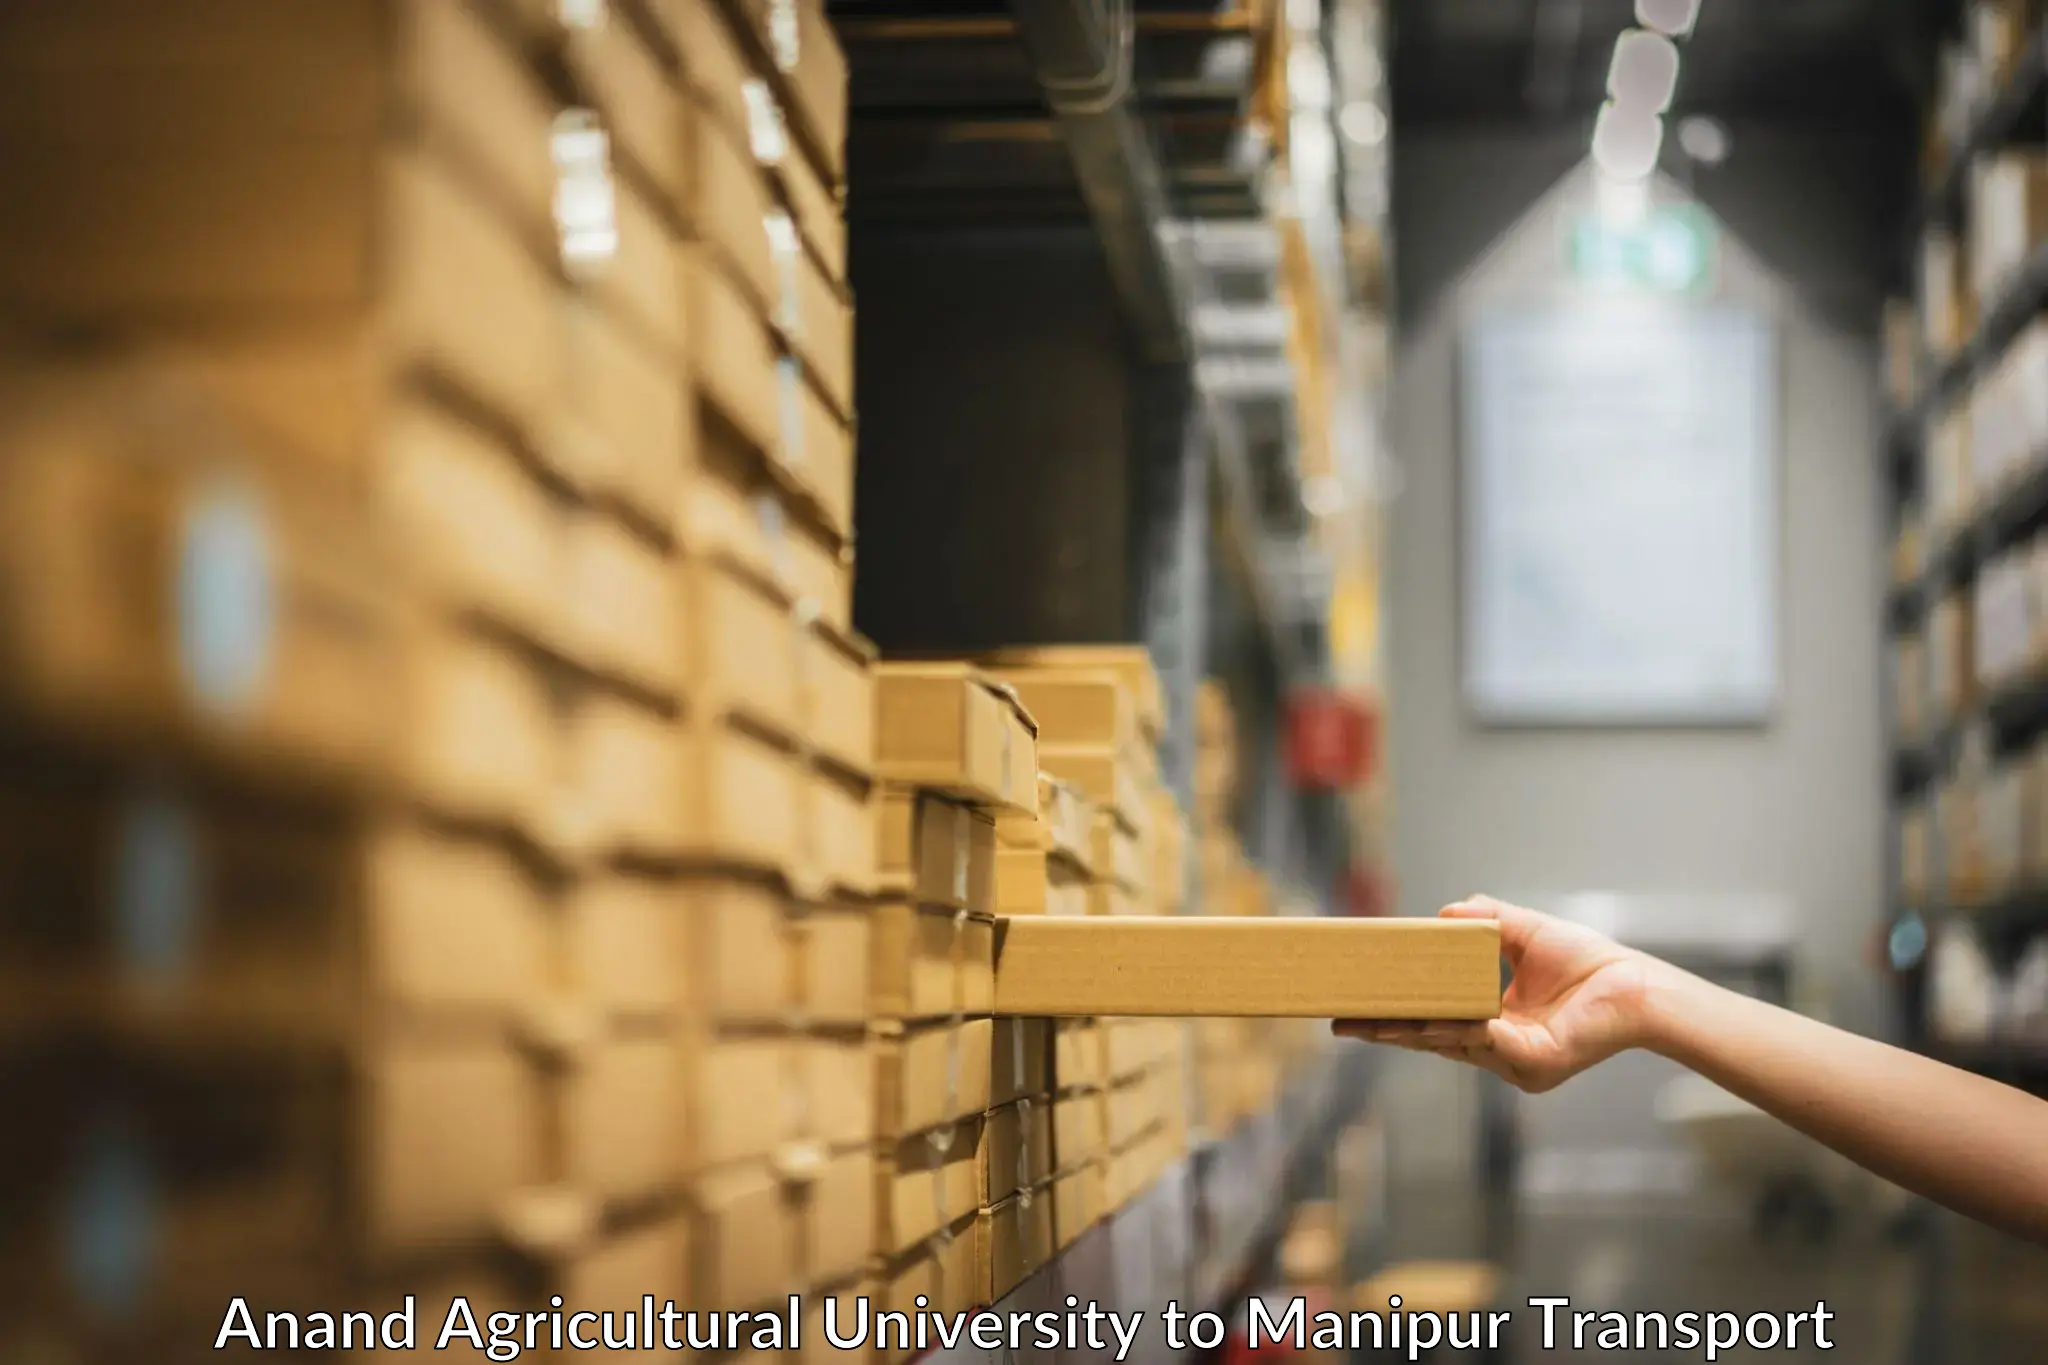 Cargo transport services Anand Agricultural University to Manipur